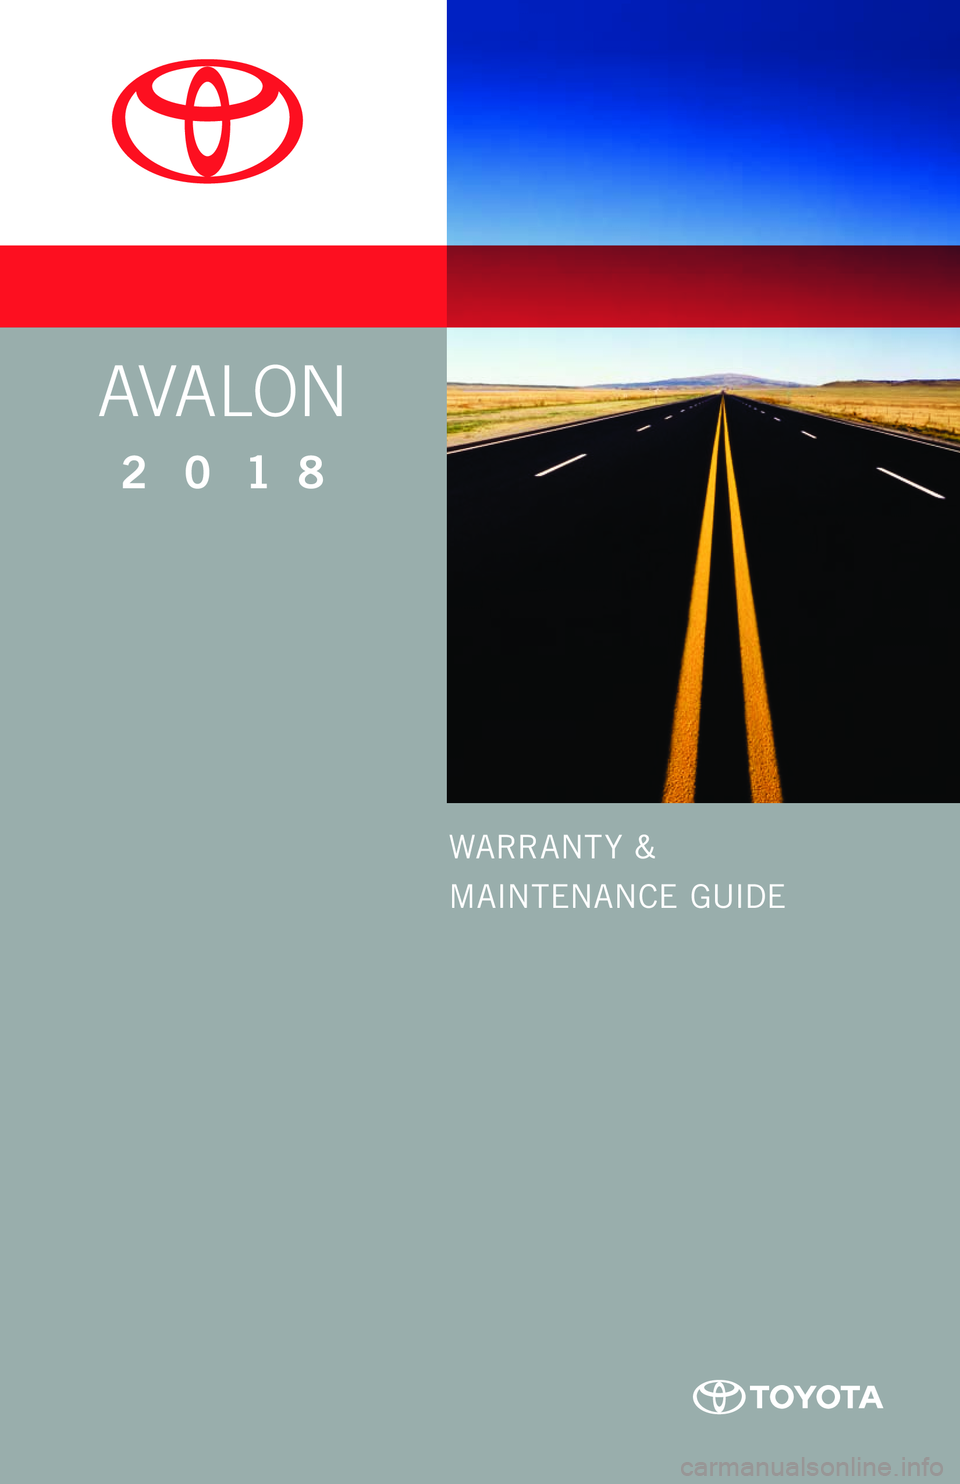 TOYOTA AVALON 2018  Warranties & Maintenance Guides (in English) WARRANT Y &
MAINTENANCE  GUIDE
AVALON
2018     
17-TCS-09990_WarrMaintGuide_Avalon_COVER_1_0F_lm.indd   25/6/17   12:54 PM  